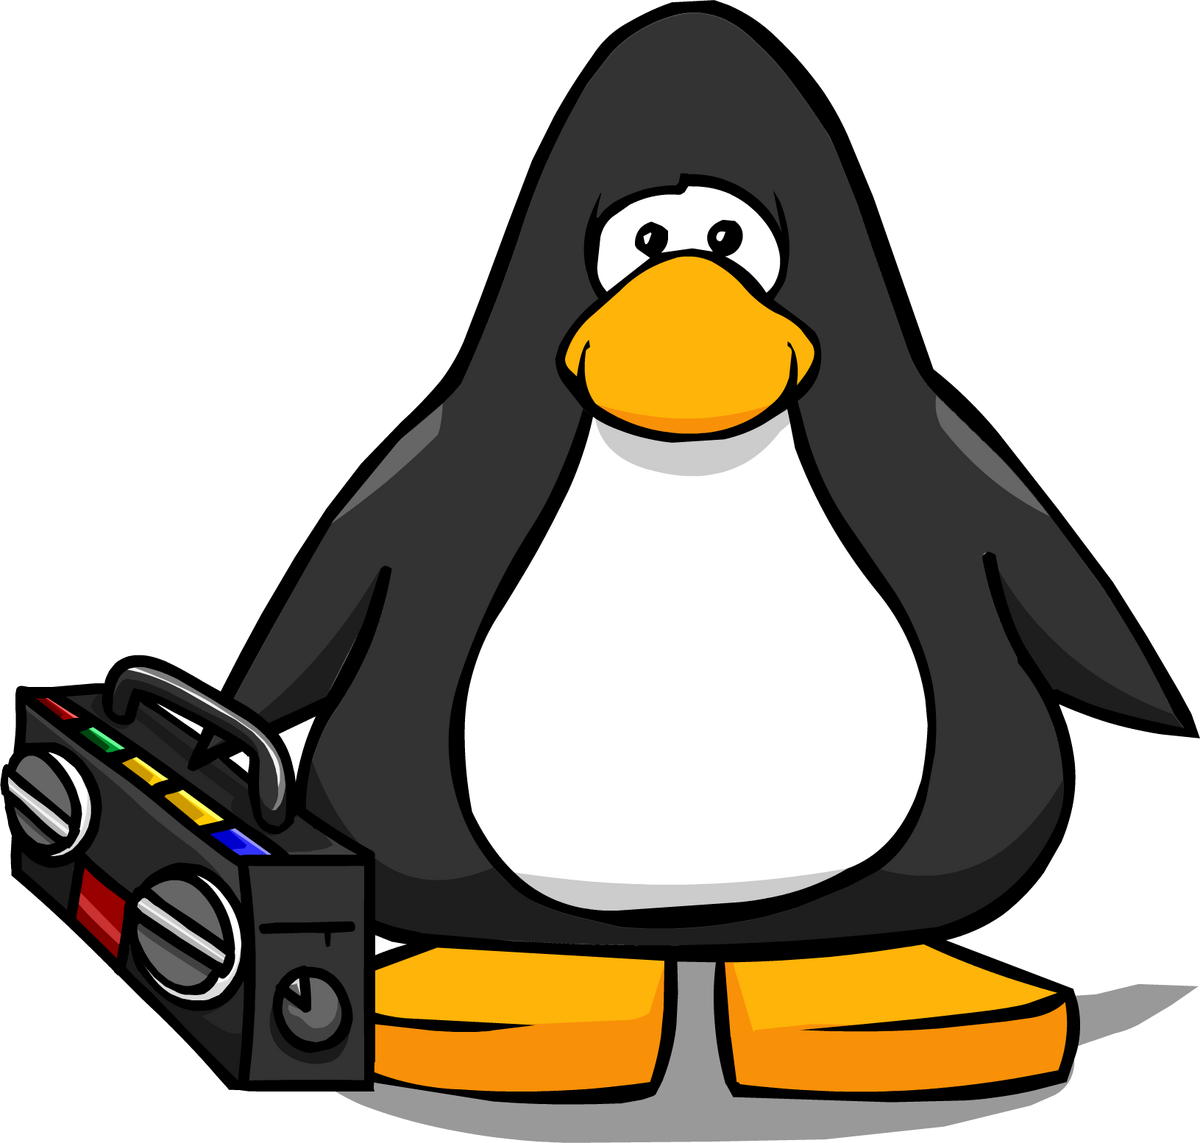 RocketSnail on X: Great interview yesterday with some old Club Penguin  players. I am having fun building a new world for the next generation of  fans. #boxcritters #clubpenguin  / X